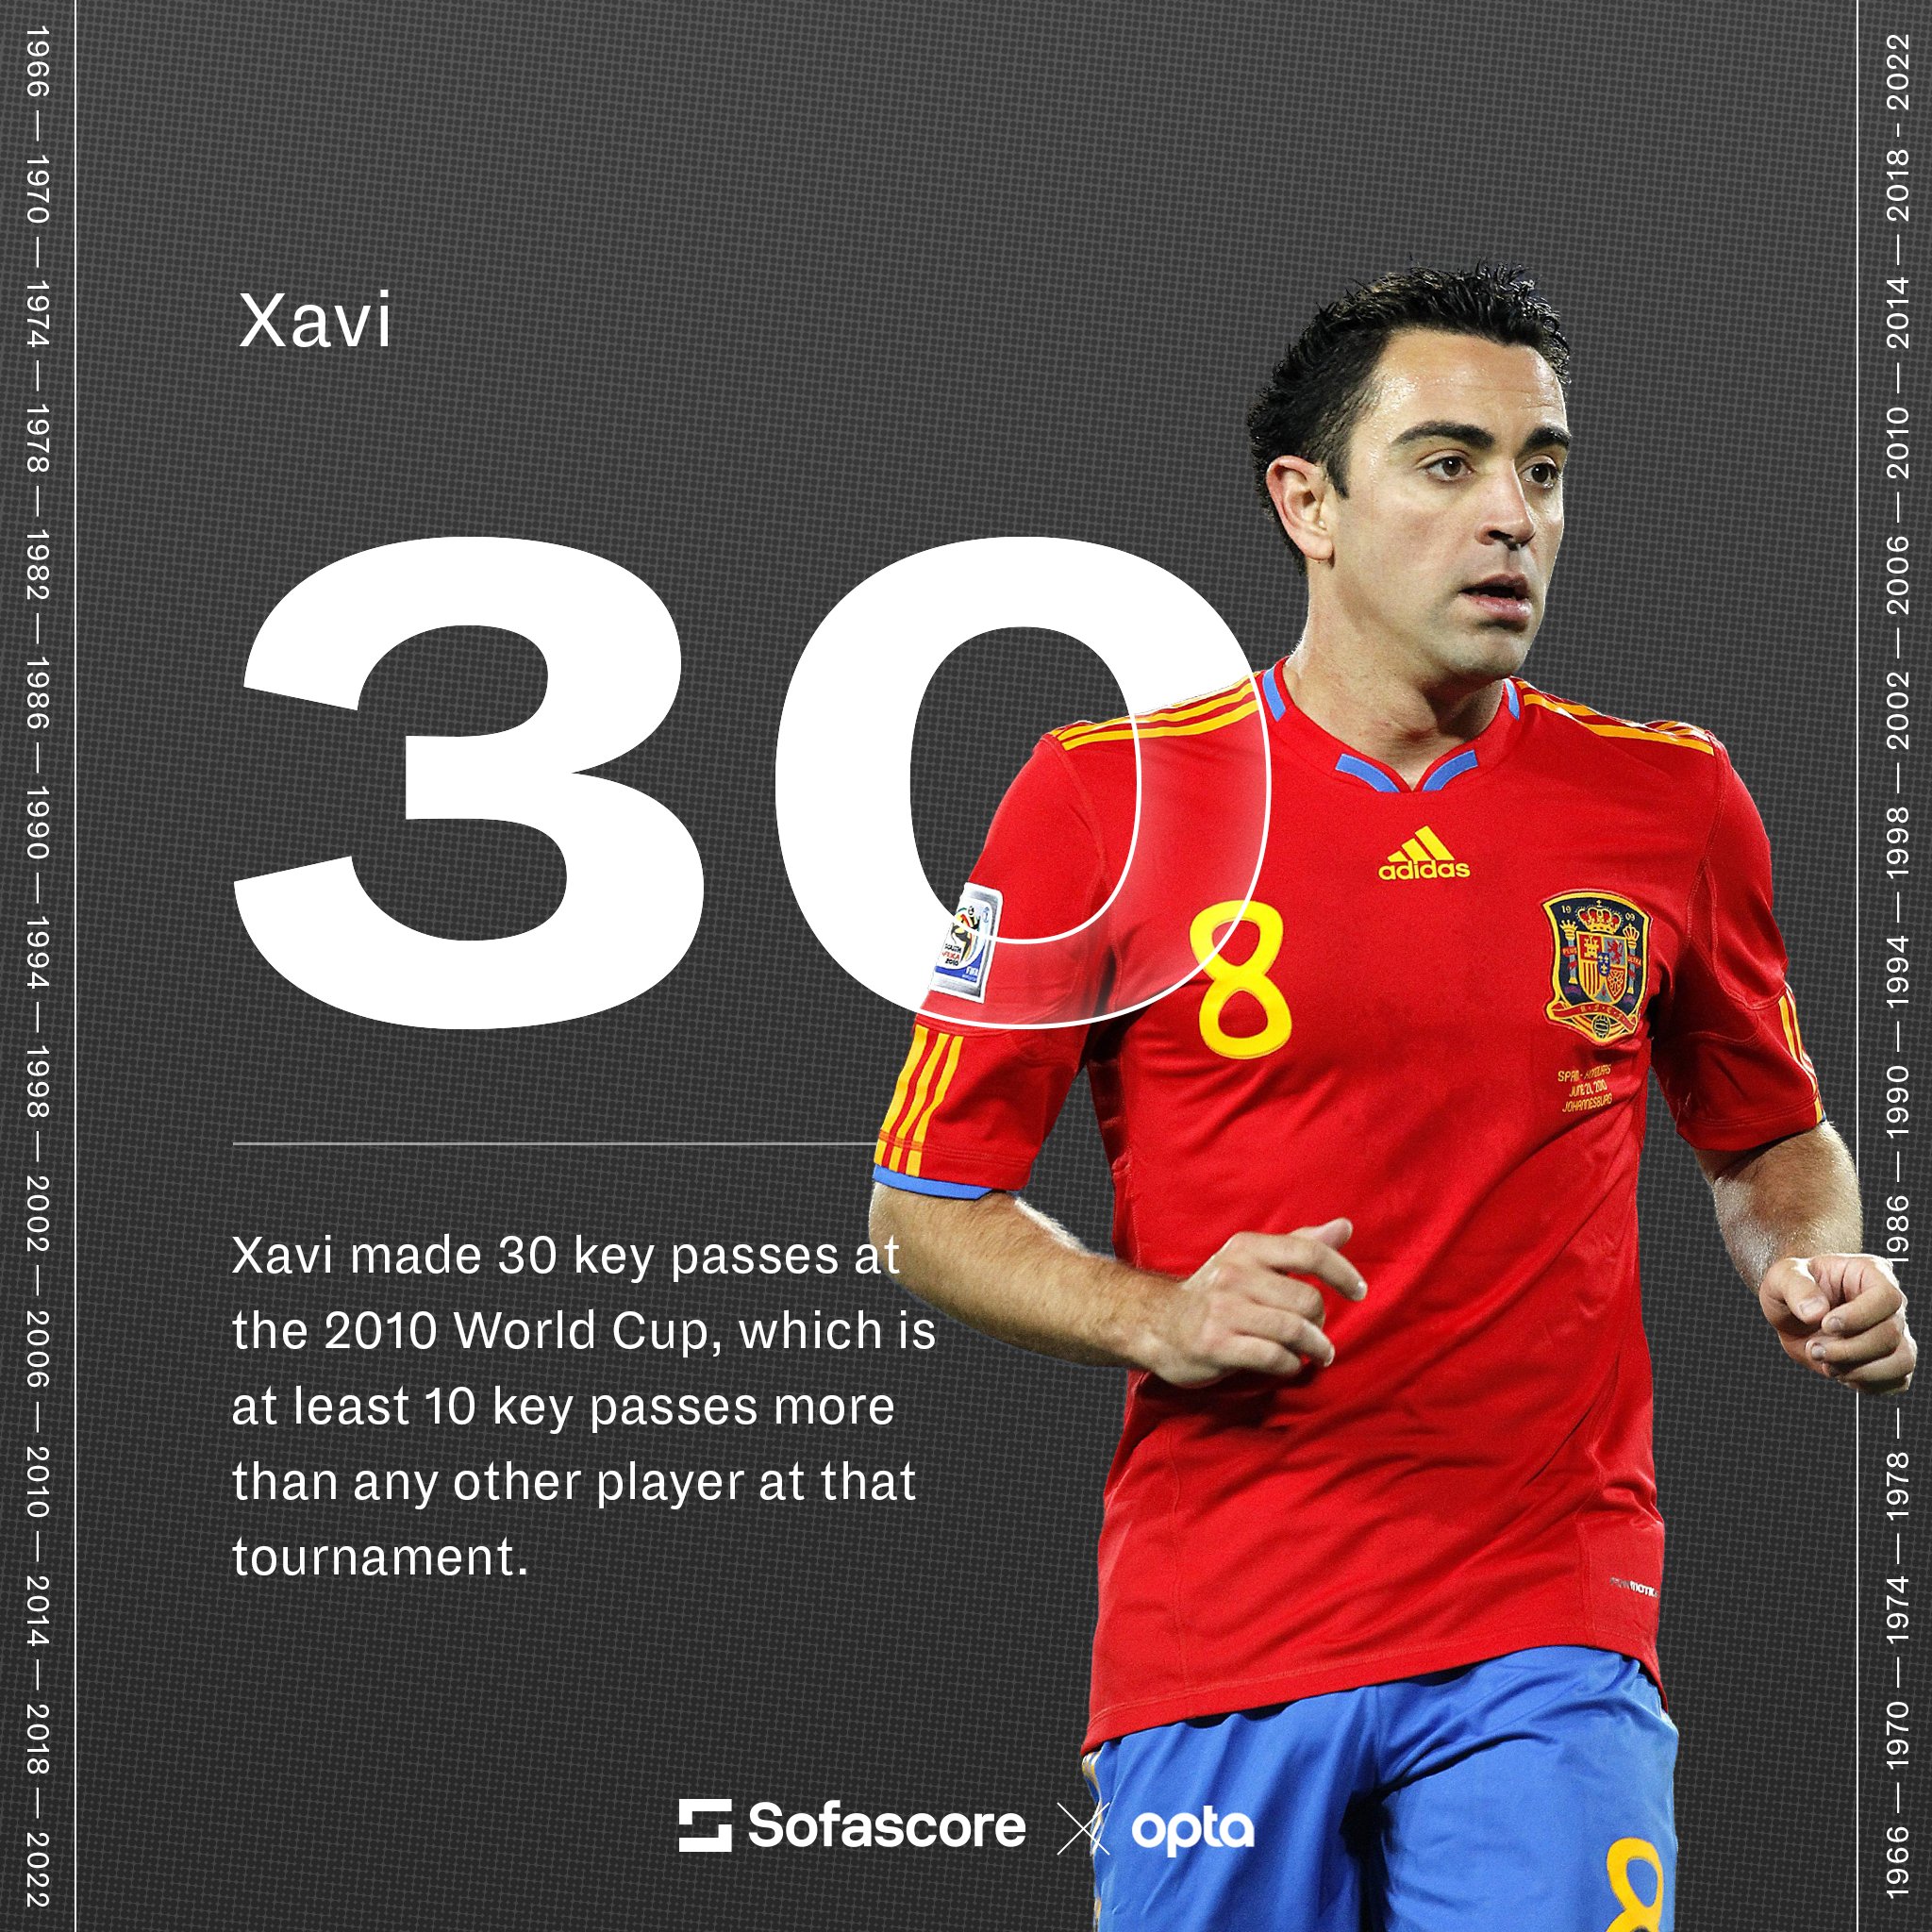 Sofascore on "⏳ | 30 DAYS UNTIL THE WORLD CUP Our World Cup countdown starts with a particularly impressive posted by Xavi route to Spain's 2010 title win! 🔑